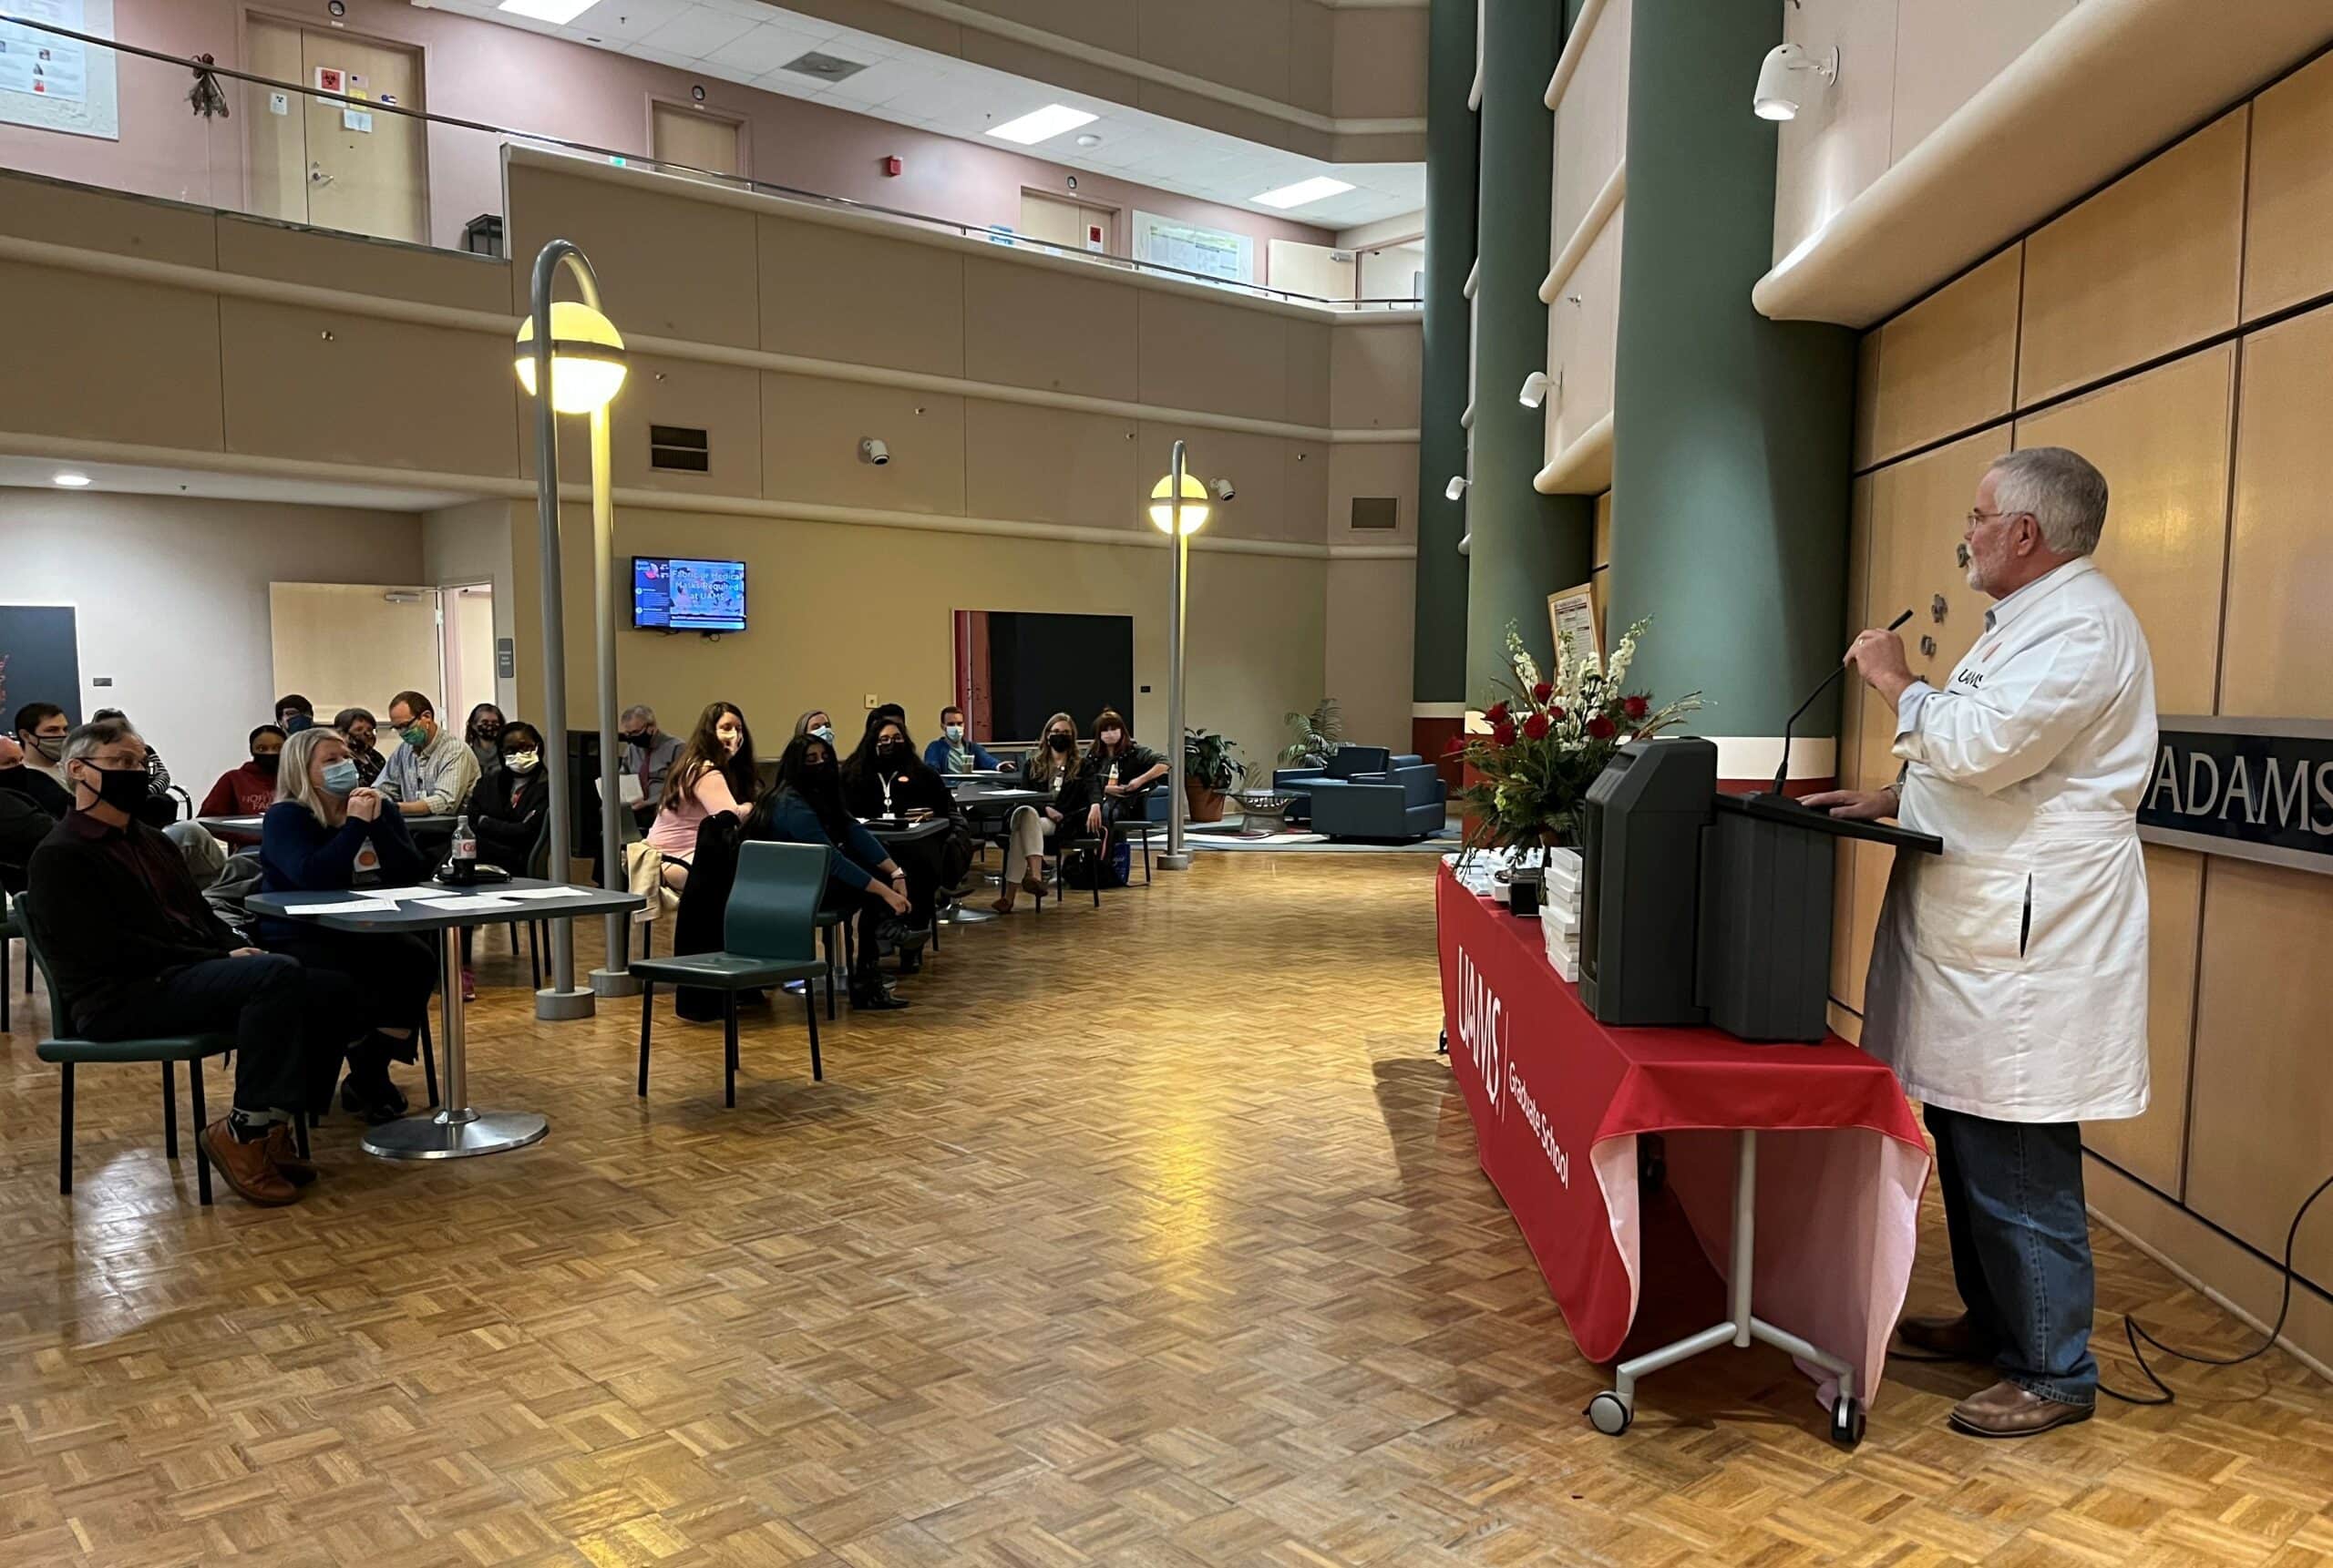 "One of the best lessons this pandemic has taught us is there are lots of ways to do things right," Graduate School Dean Robert McGehee Jr., Ph.D. told a crowd of about 50 students, faculty and staff at a recent Annual Winter Awards reception.